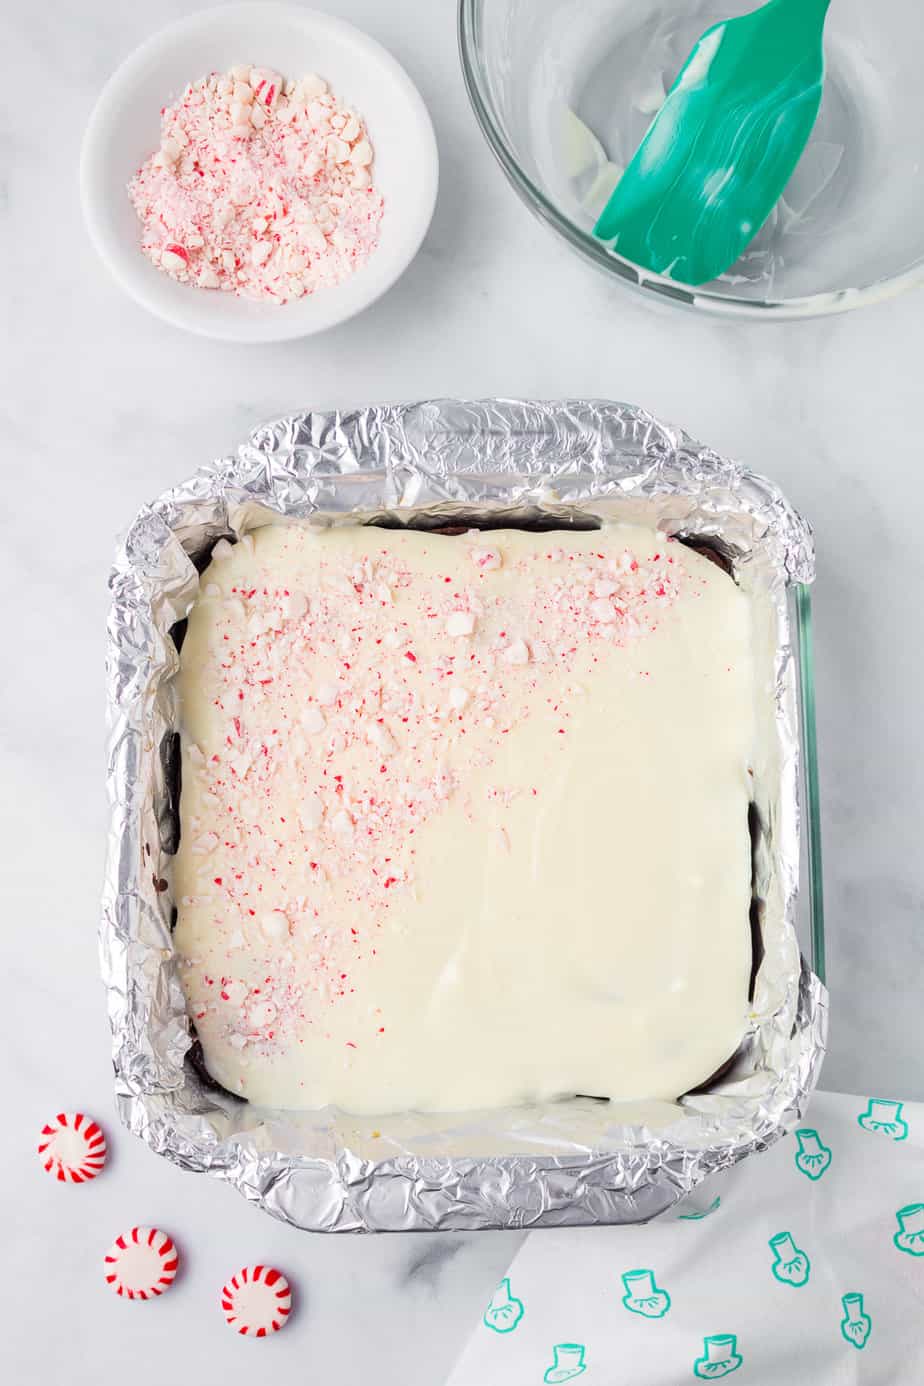 Brownies in the pan layered with melted white chocolate and broken pieces of peppermint candy from above with a bowl of more broken peppermint candies and a bowl with a spatula nearby on the counter.